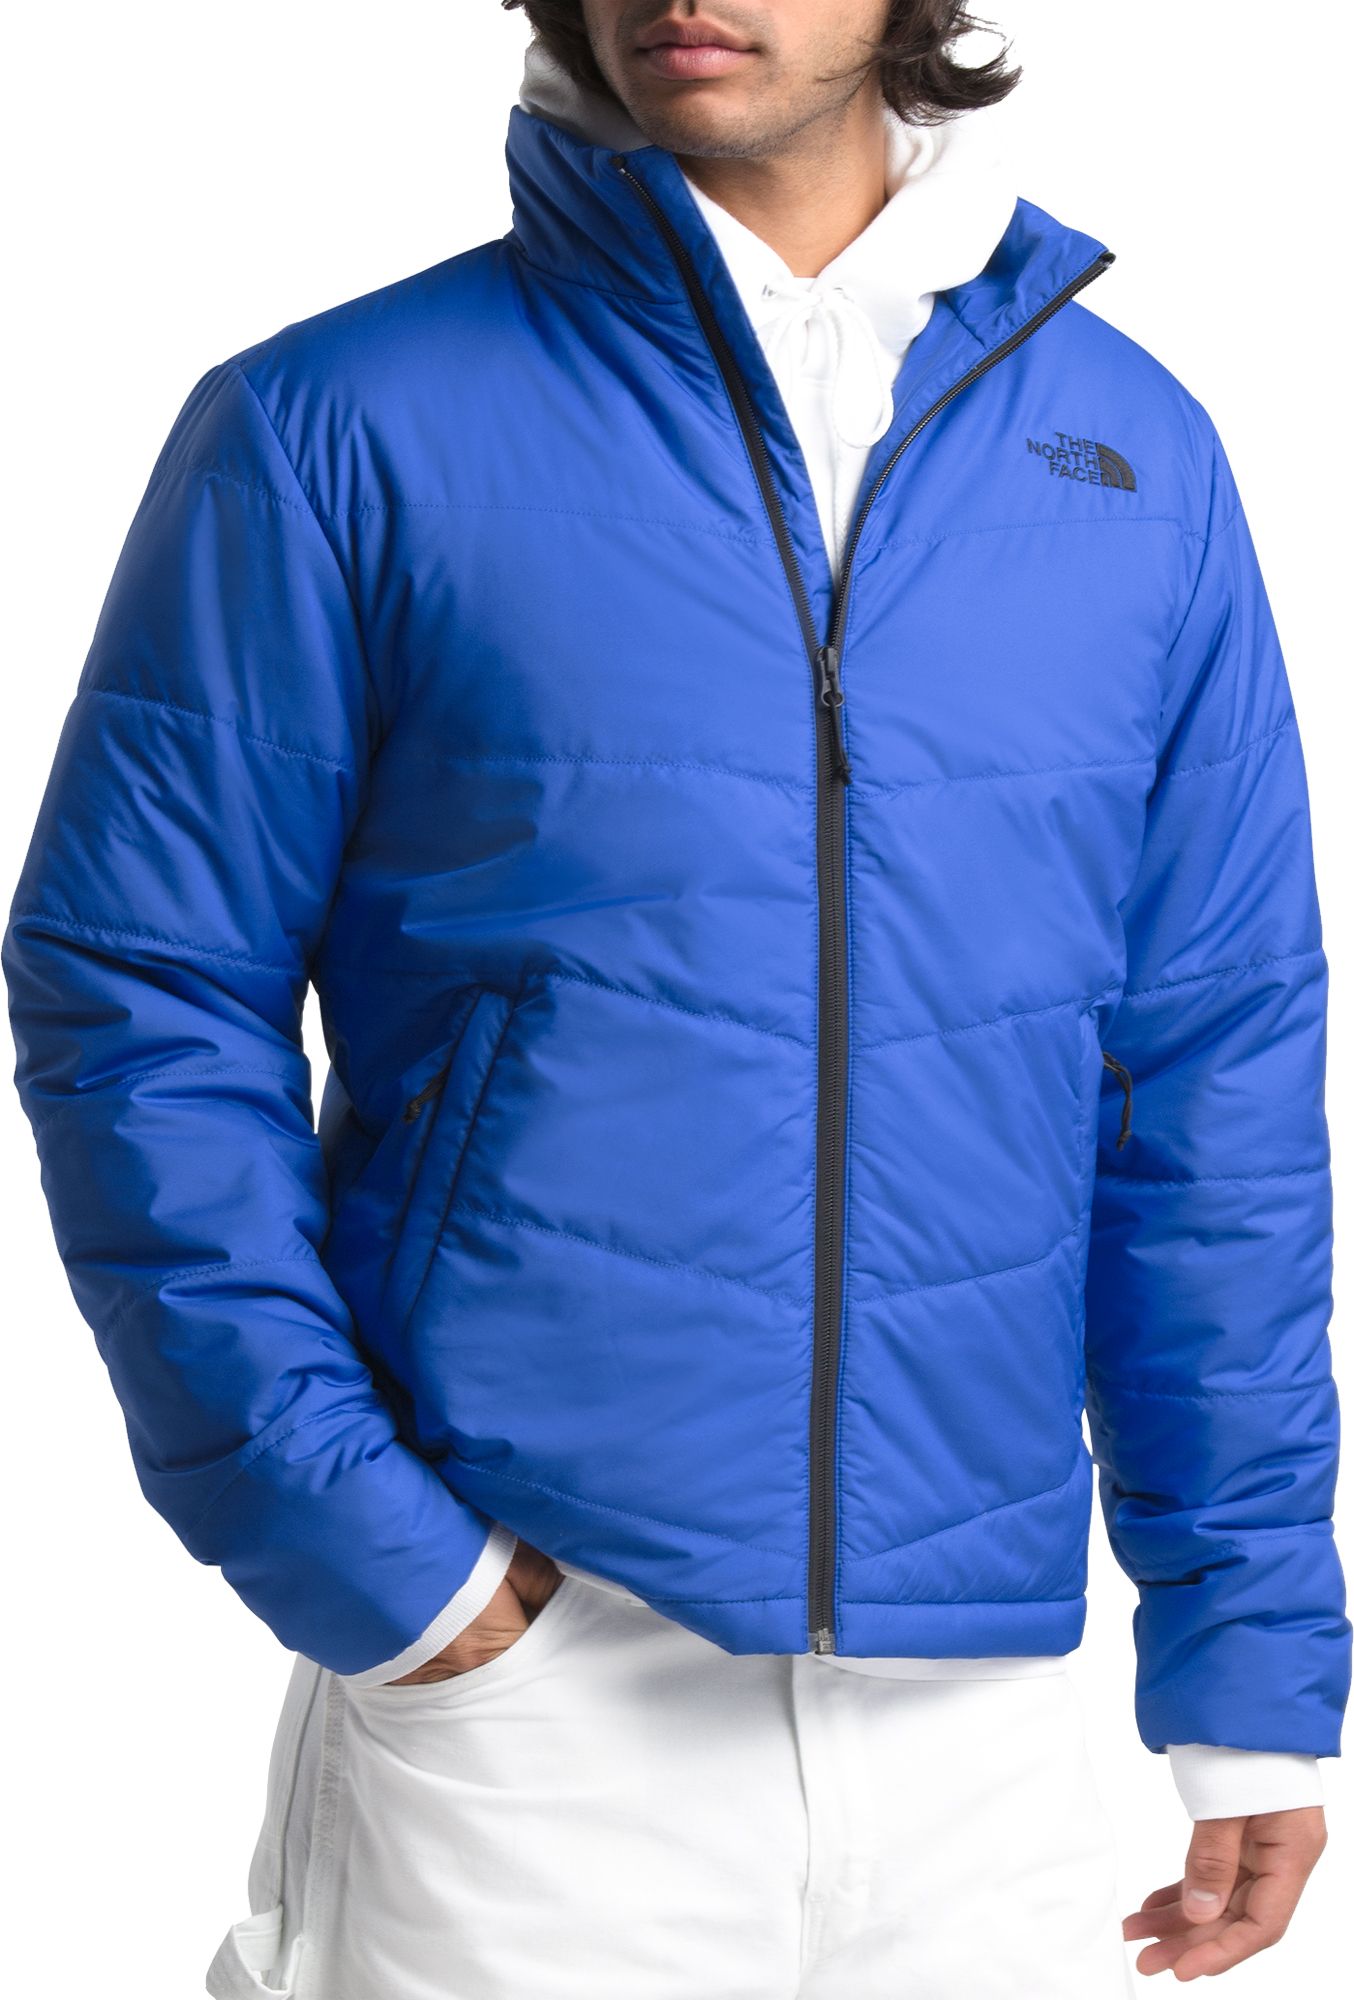 north face coats at dick's sporting goods